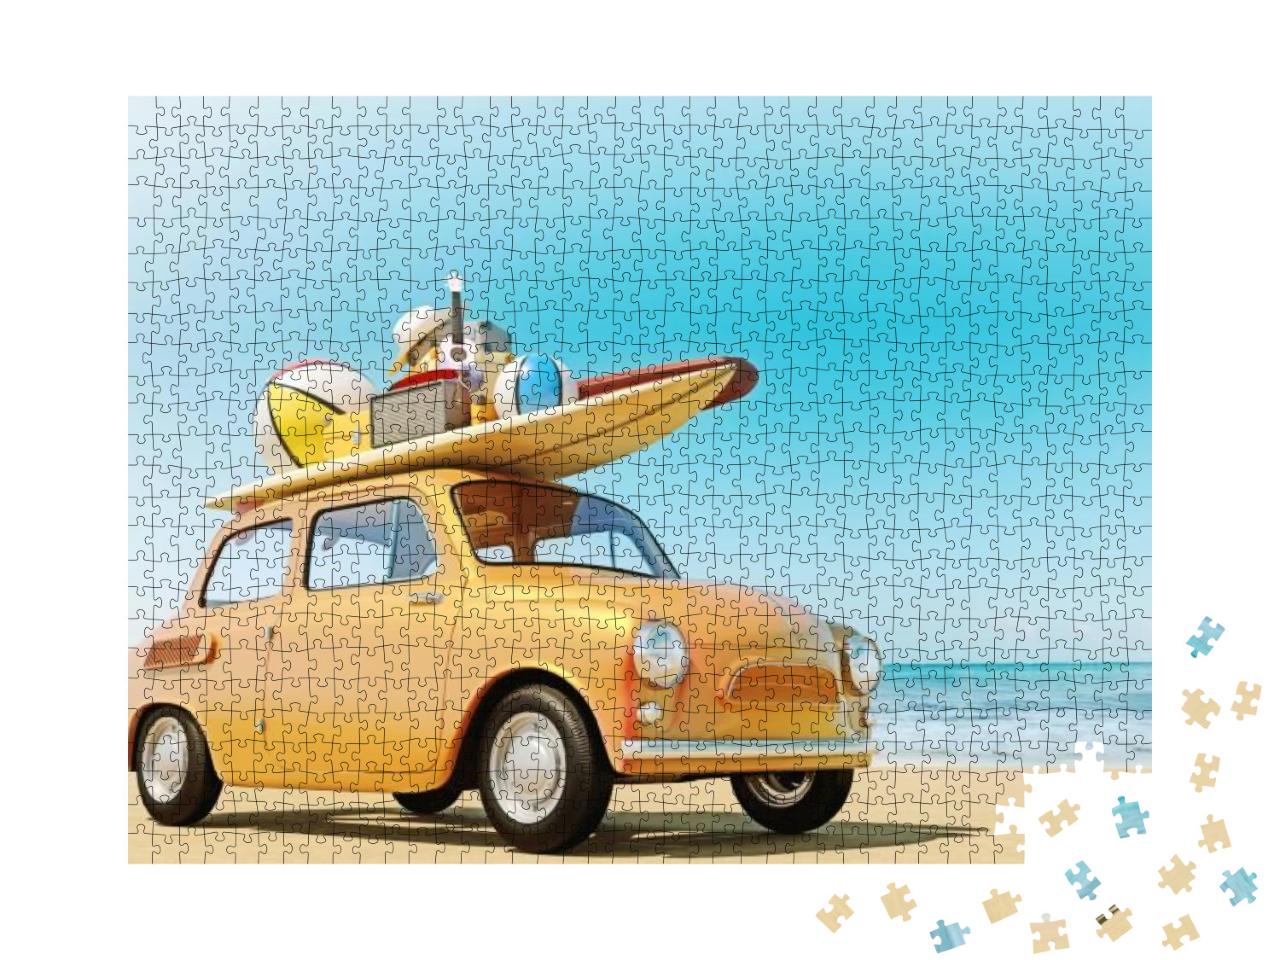 Small Retro Car with Baggage, Luggage & Beach Equipment o... Jigsaw Puzzle with 1000 pieces